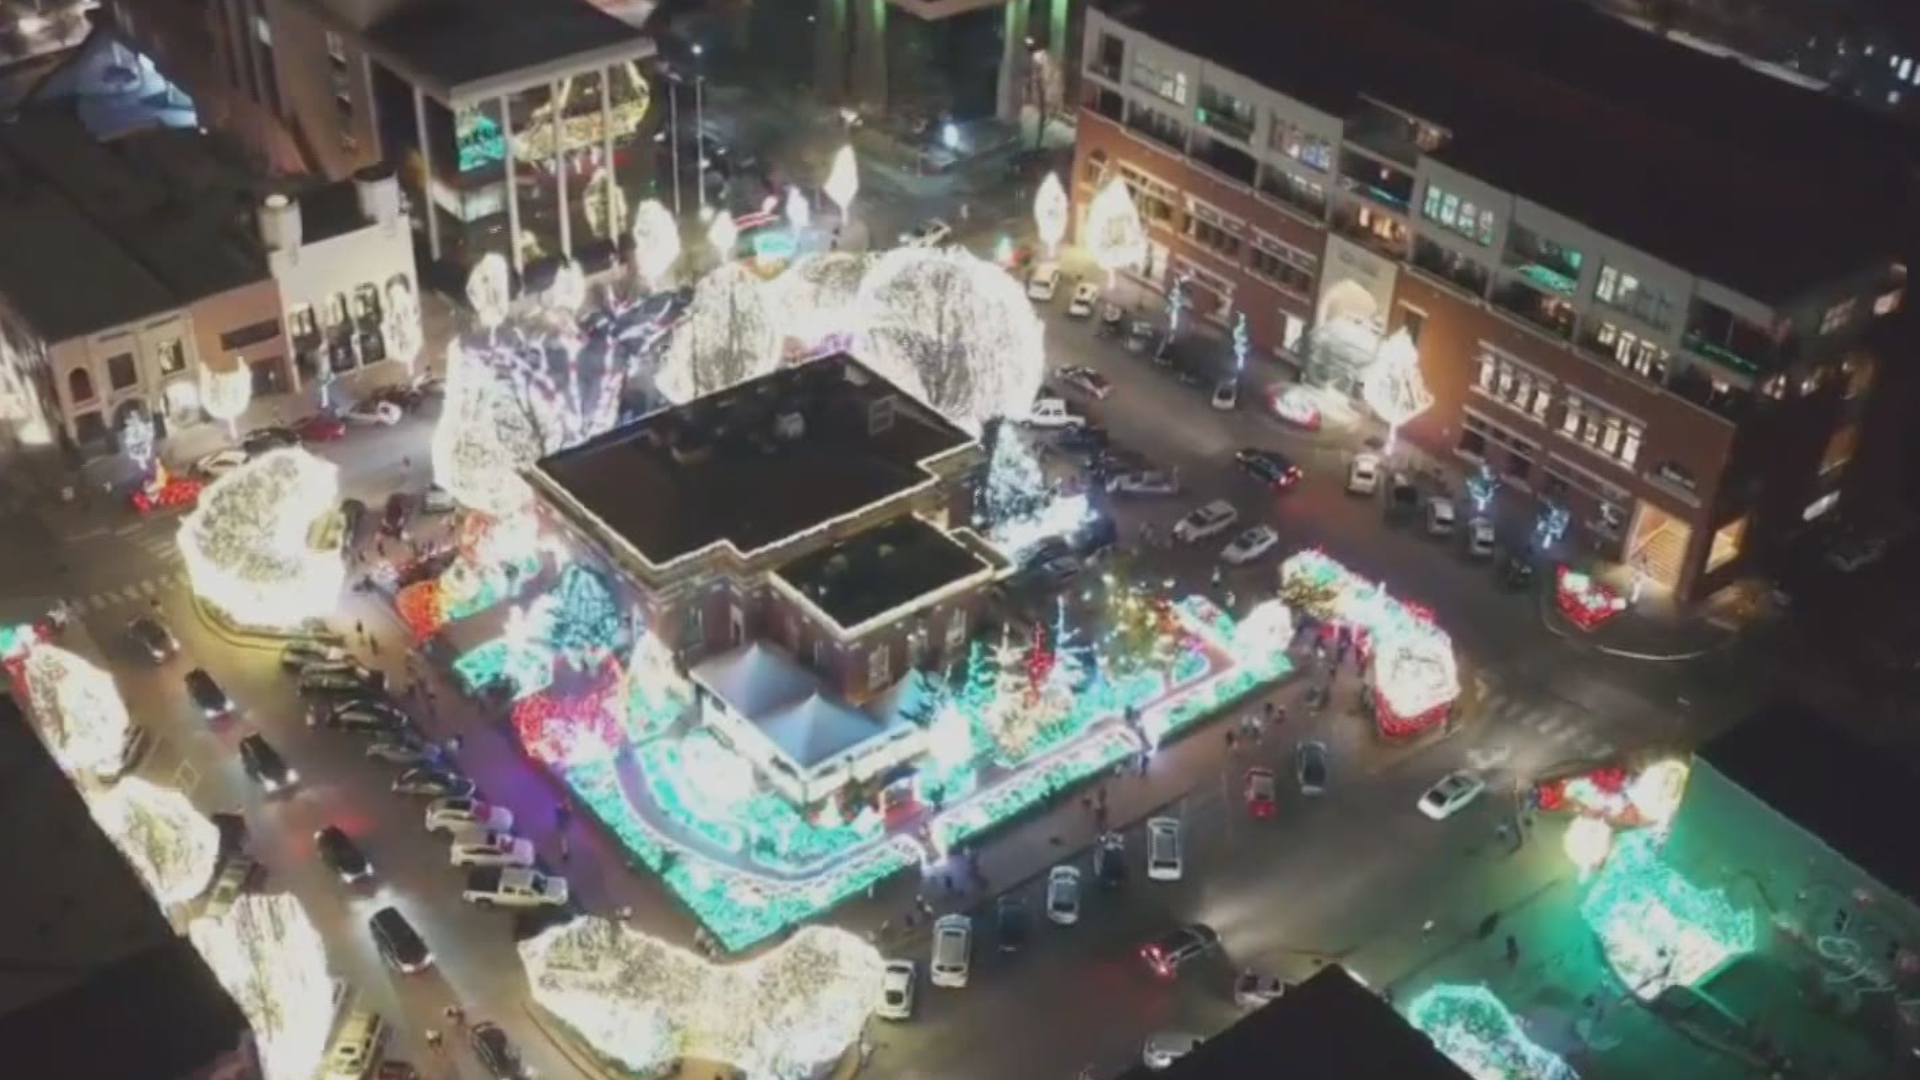 5NEWS & Experience Fayetteville brings you the 2020 Lighting of the Ozarks at the Fayetteville Square